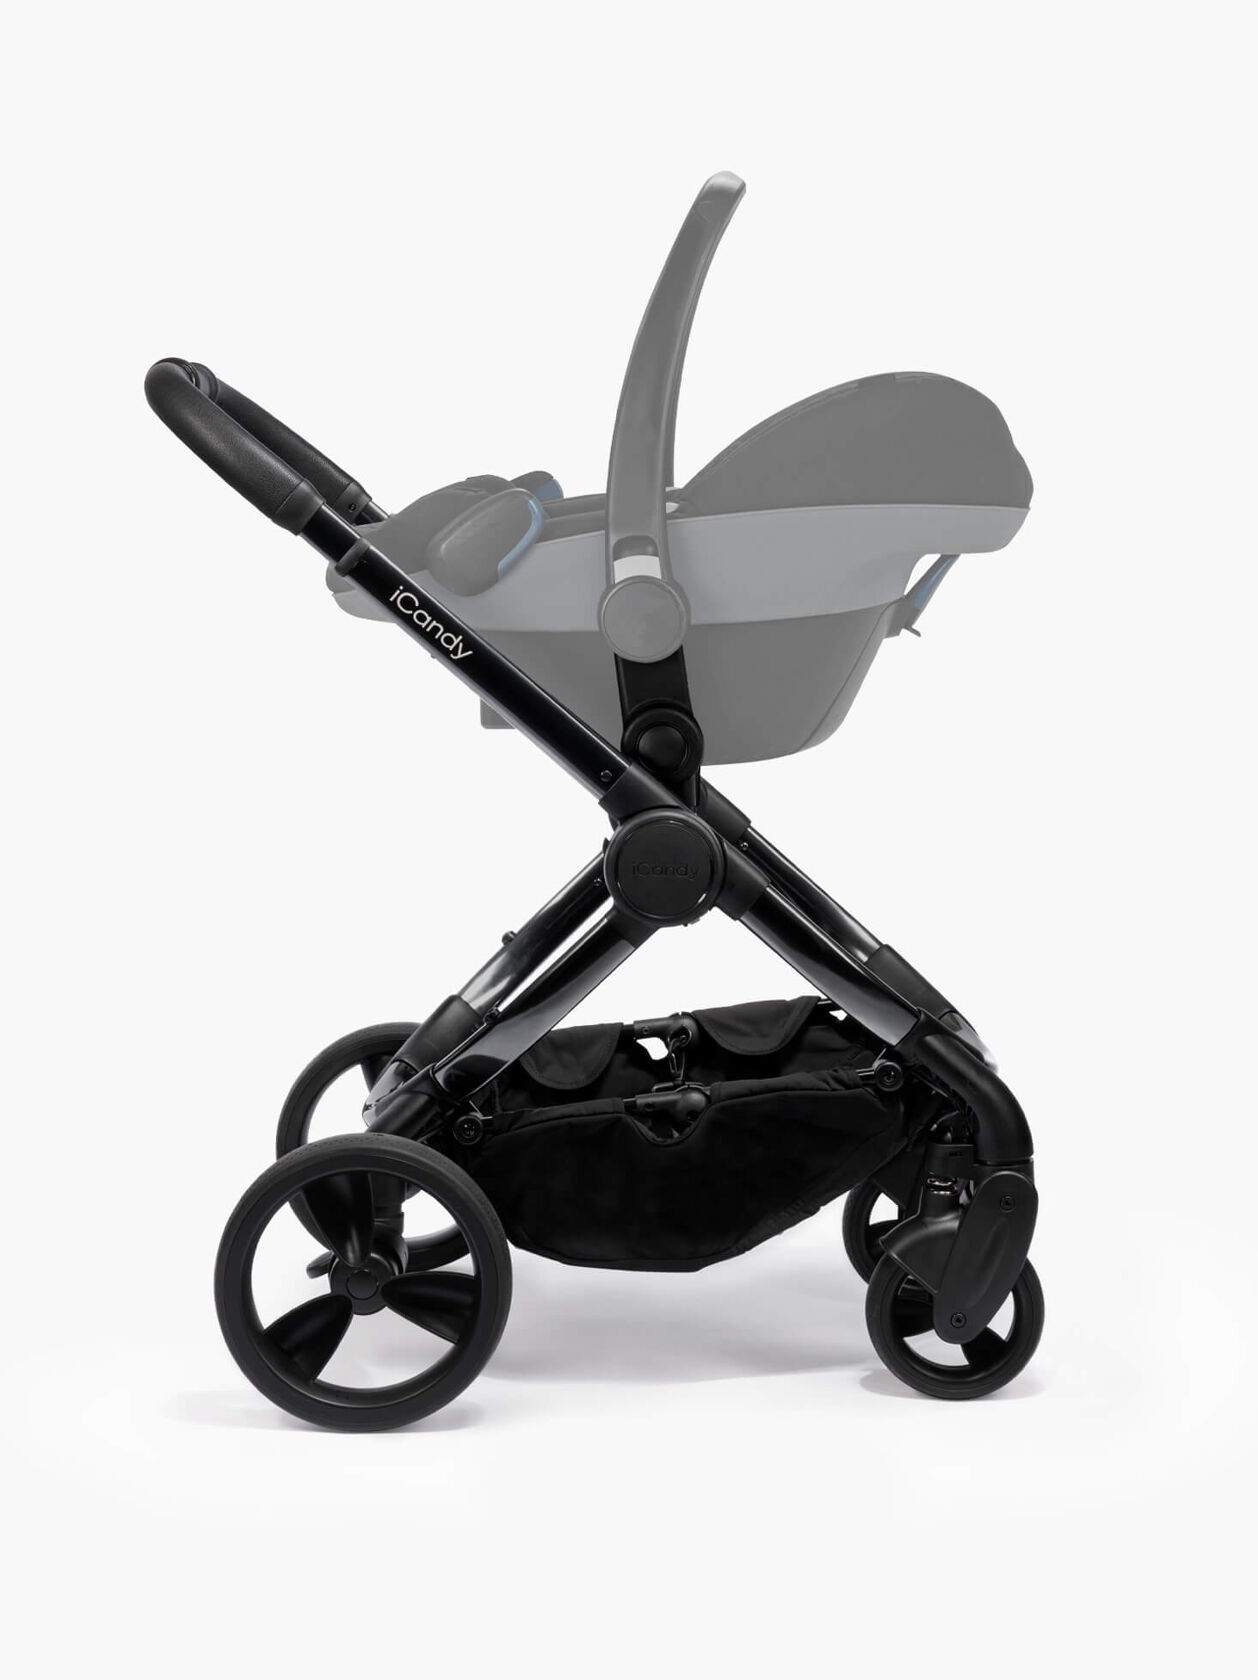 Peach Pushchair and Carrycot - Complete Bundle